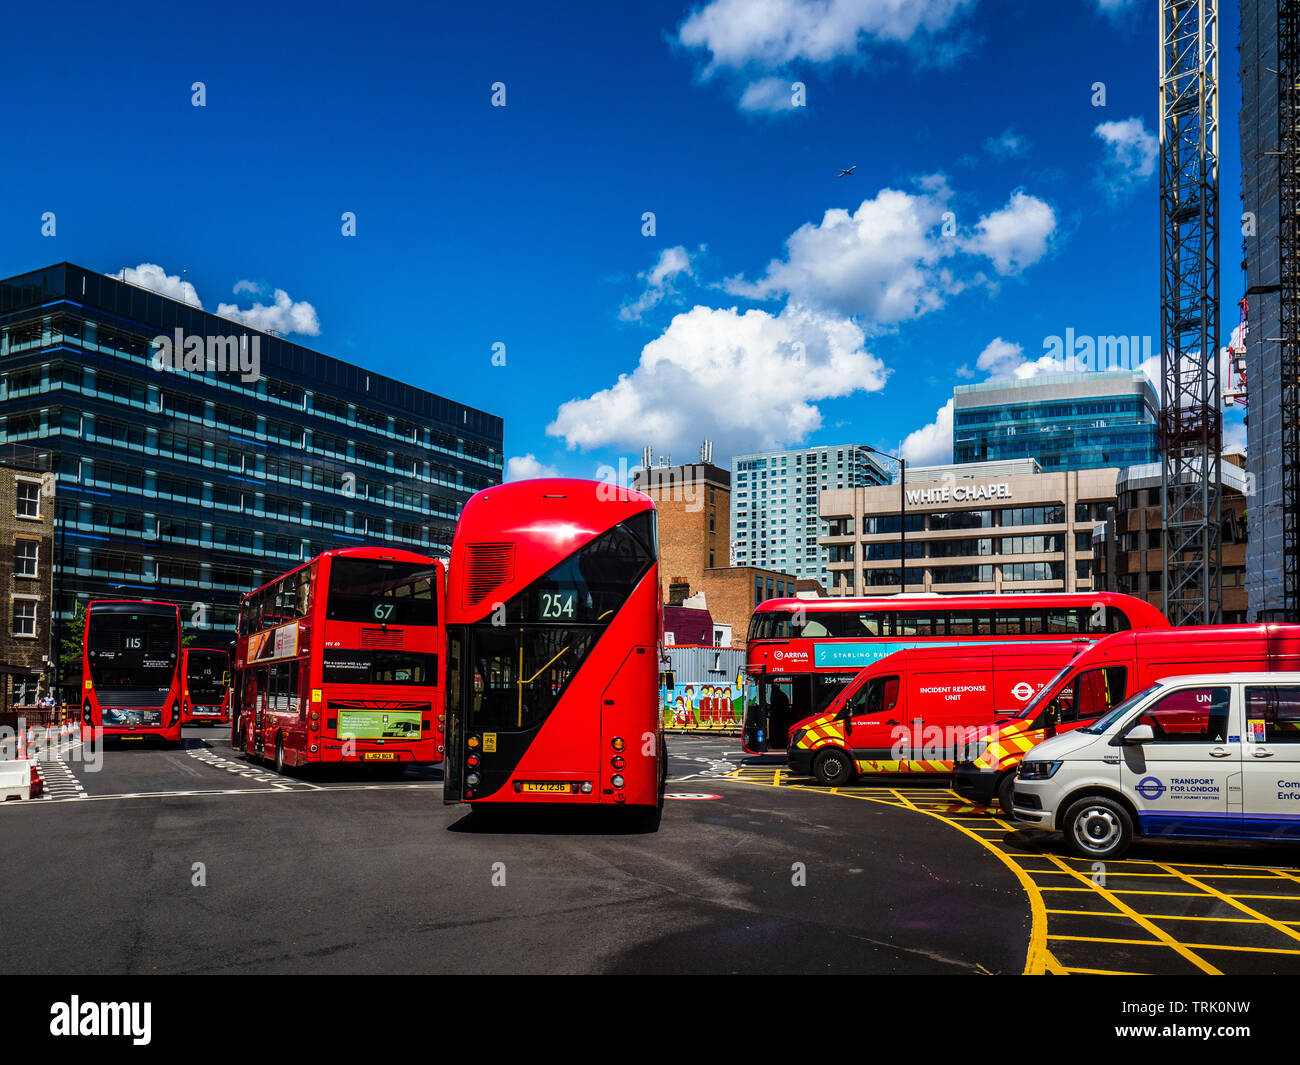 London Aldgate Bus Depot / Aldgate Bus Station in the City of London Financial District, UK, owned and maintained by Transport for London TfL Stock Photo